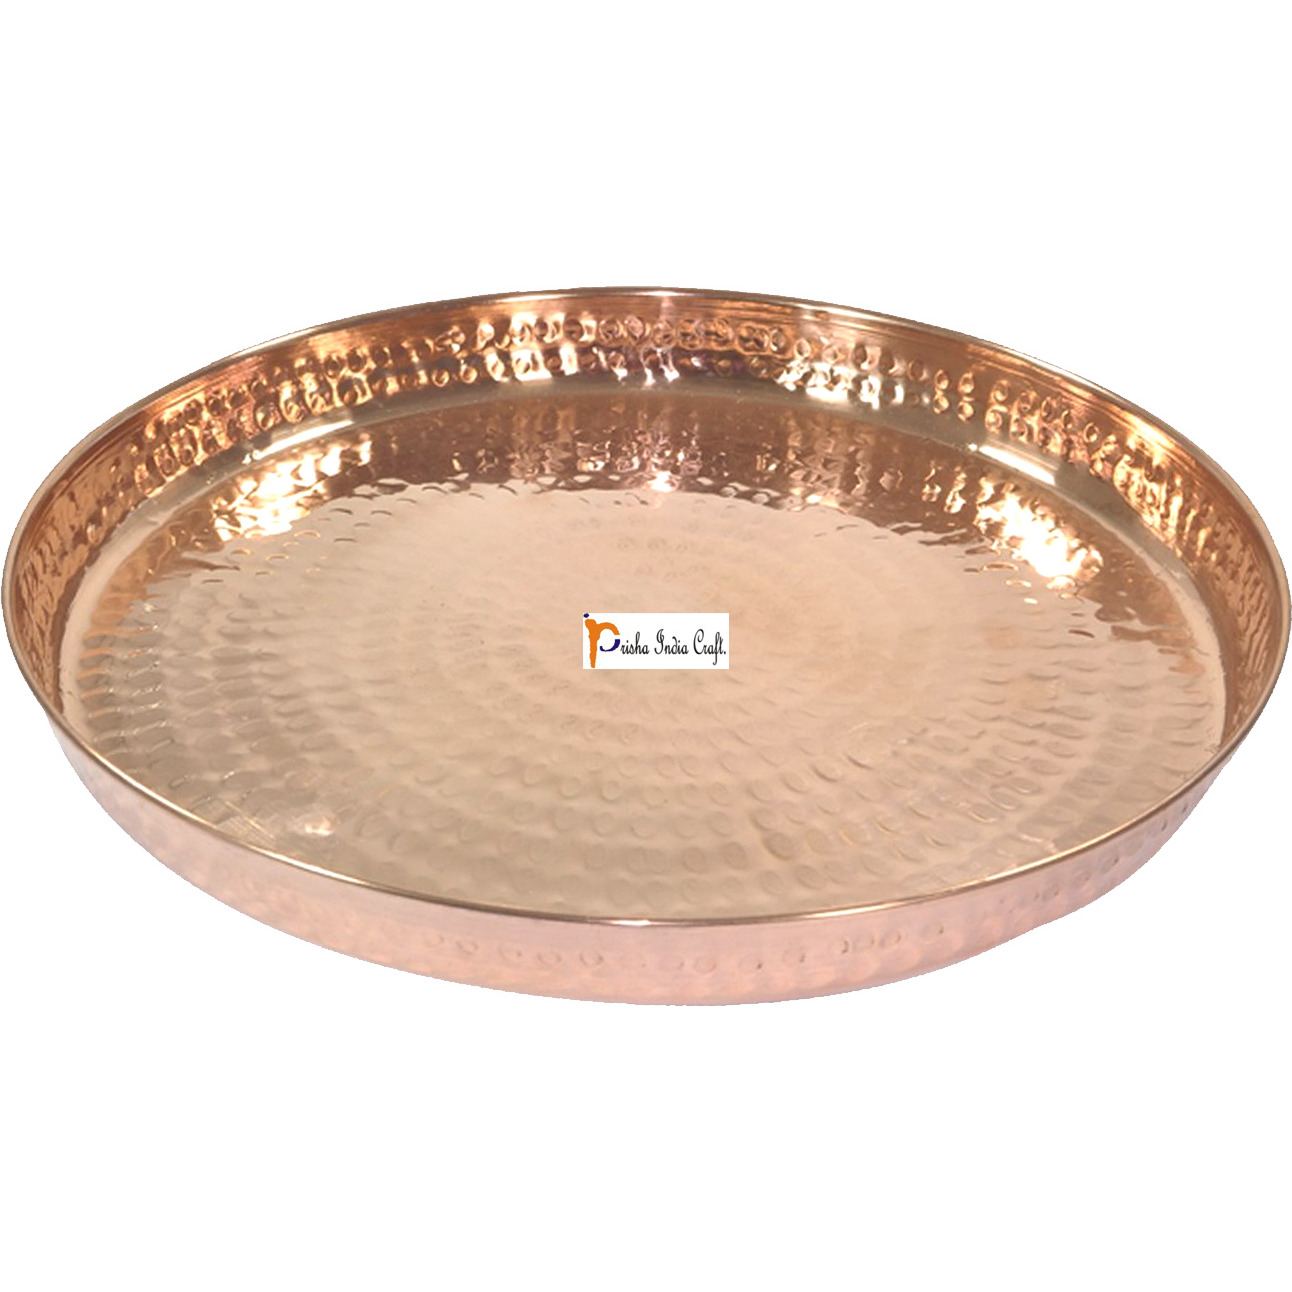 Set of 5 Prisha India Craft B. Best Dinnerware Pure Copper Thali Set Dia 12  Indian Traditional Dinner Set of Plate, Bowl, Spoons, Glass with Napkin ring and Coaster - Christmas Gift